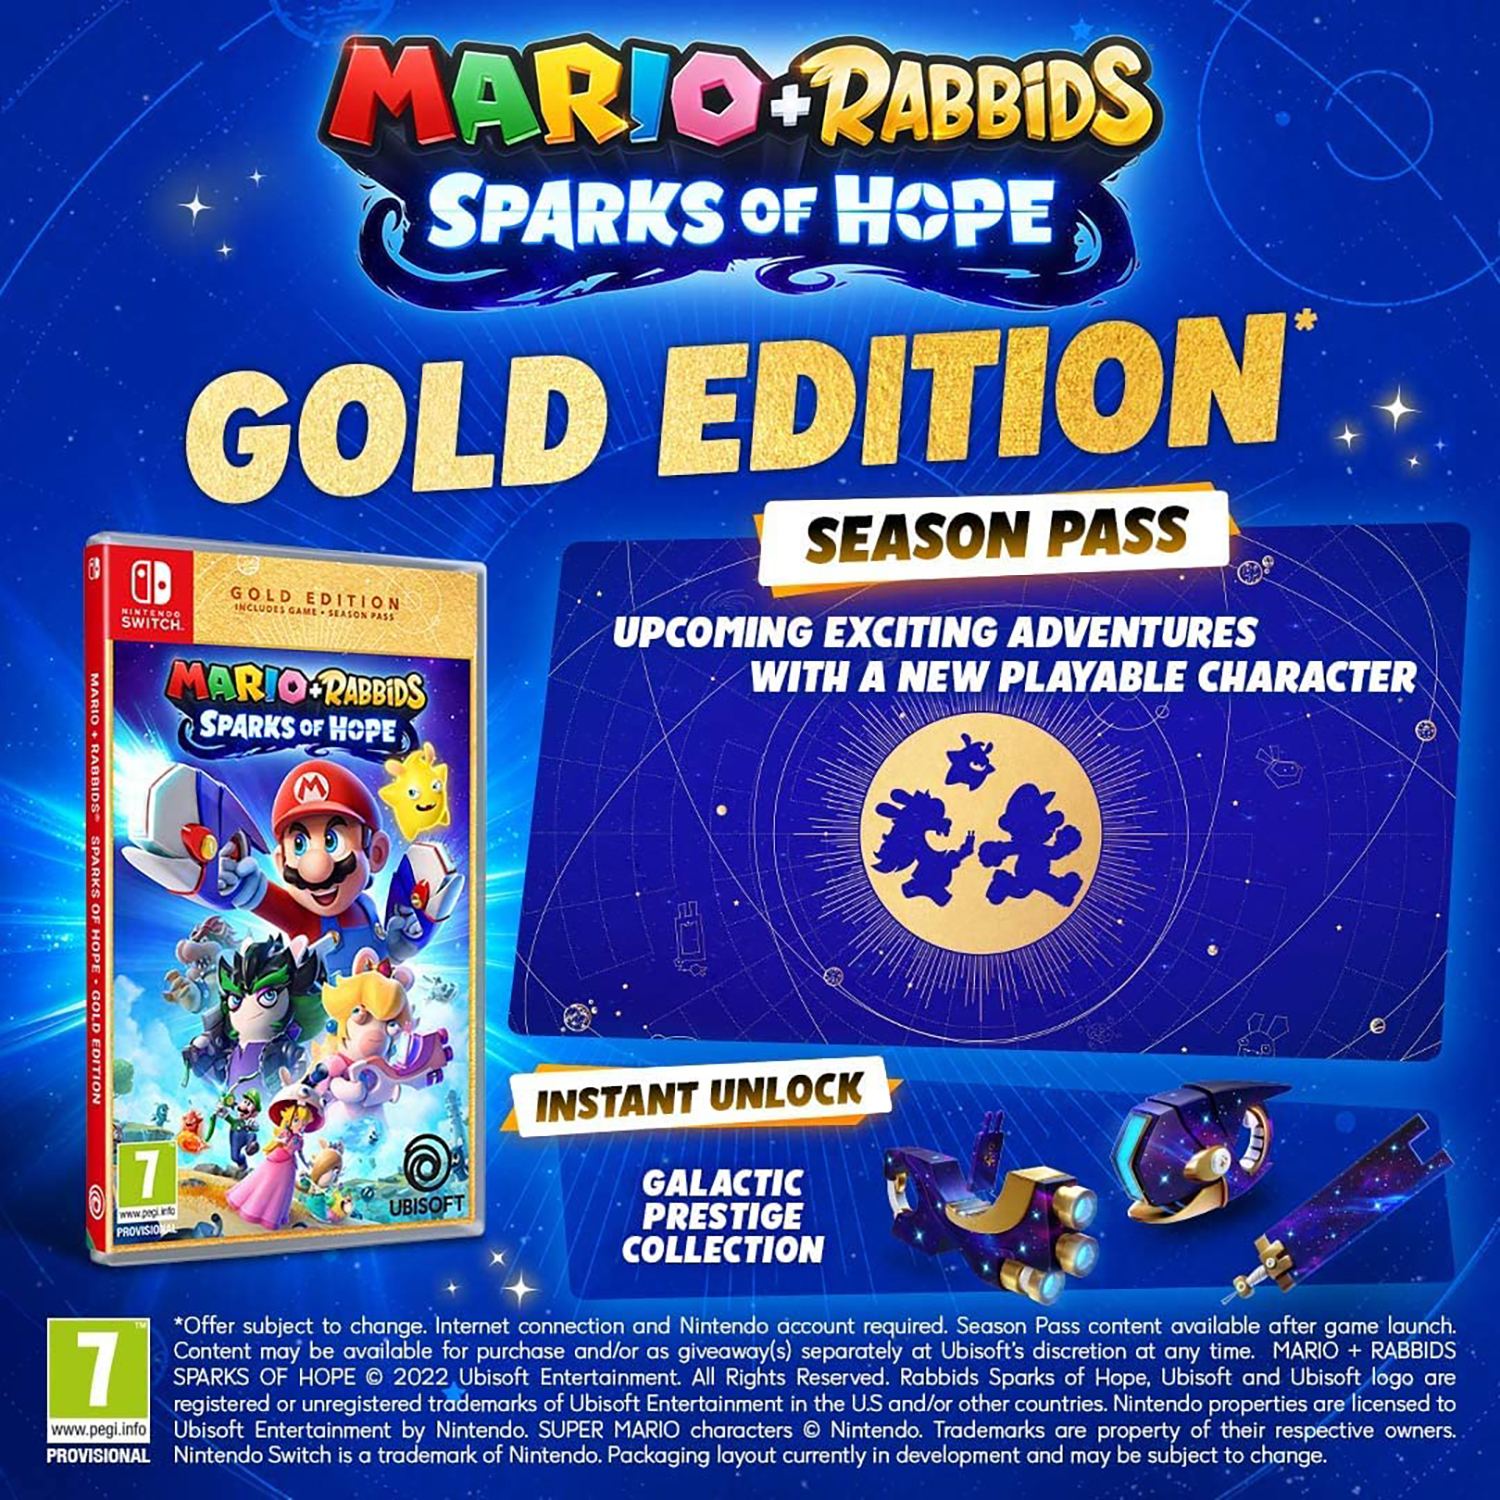 [Gold Switch + Hope Sparks of for Rabbids Nintendo Mario Edition]